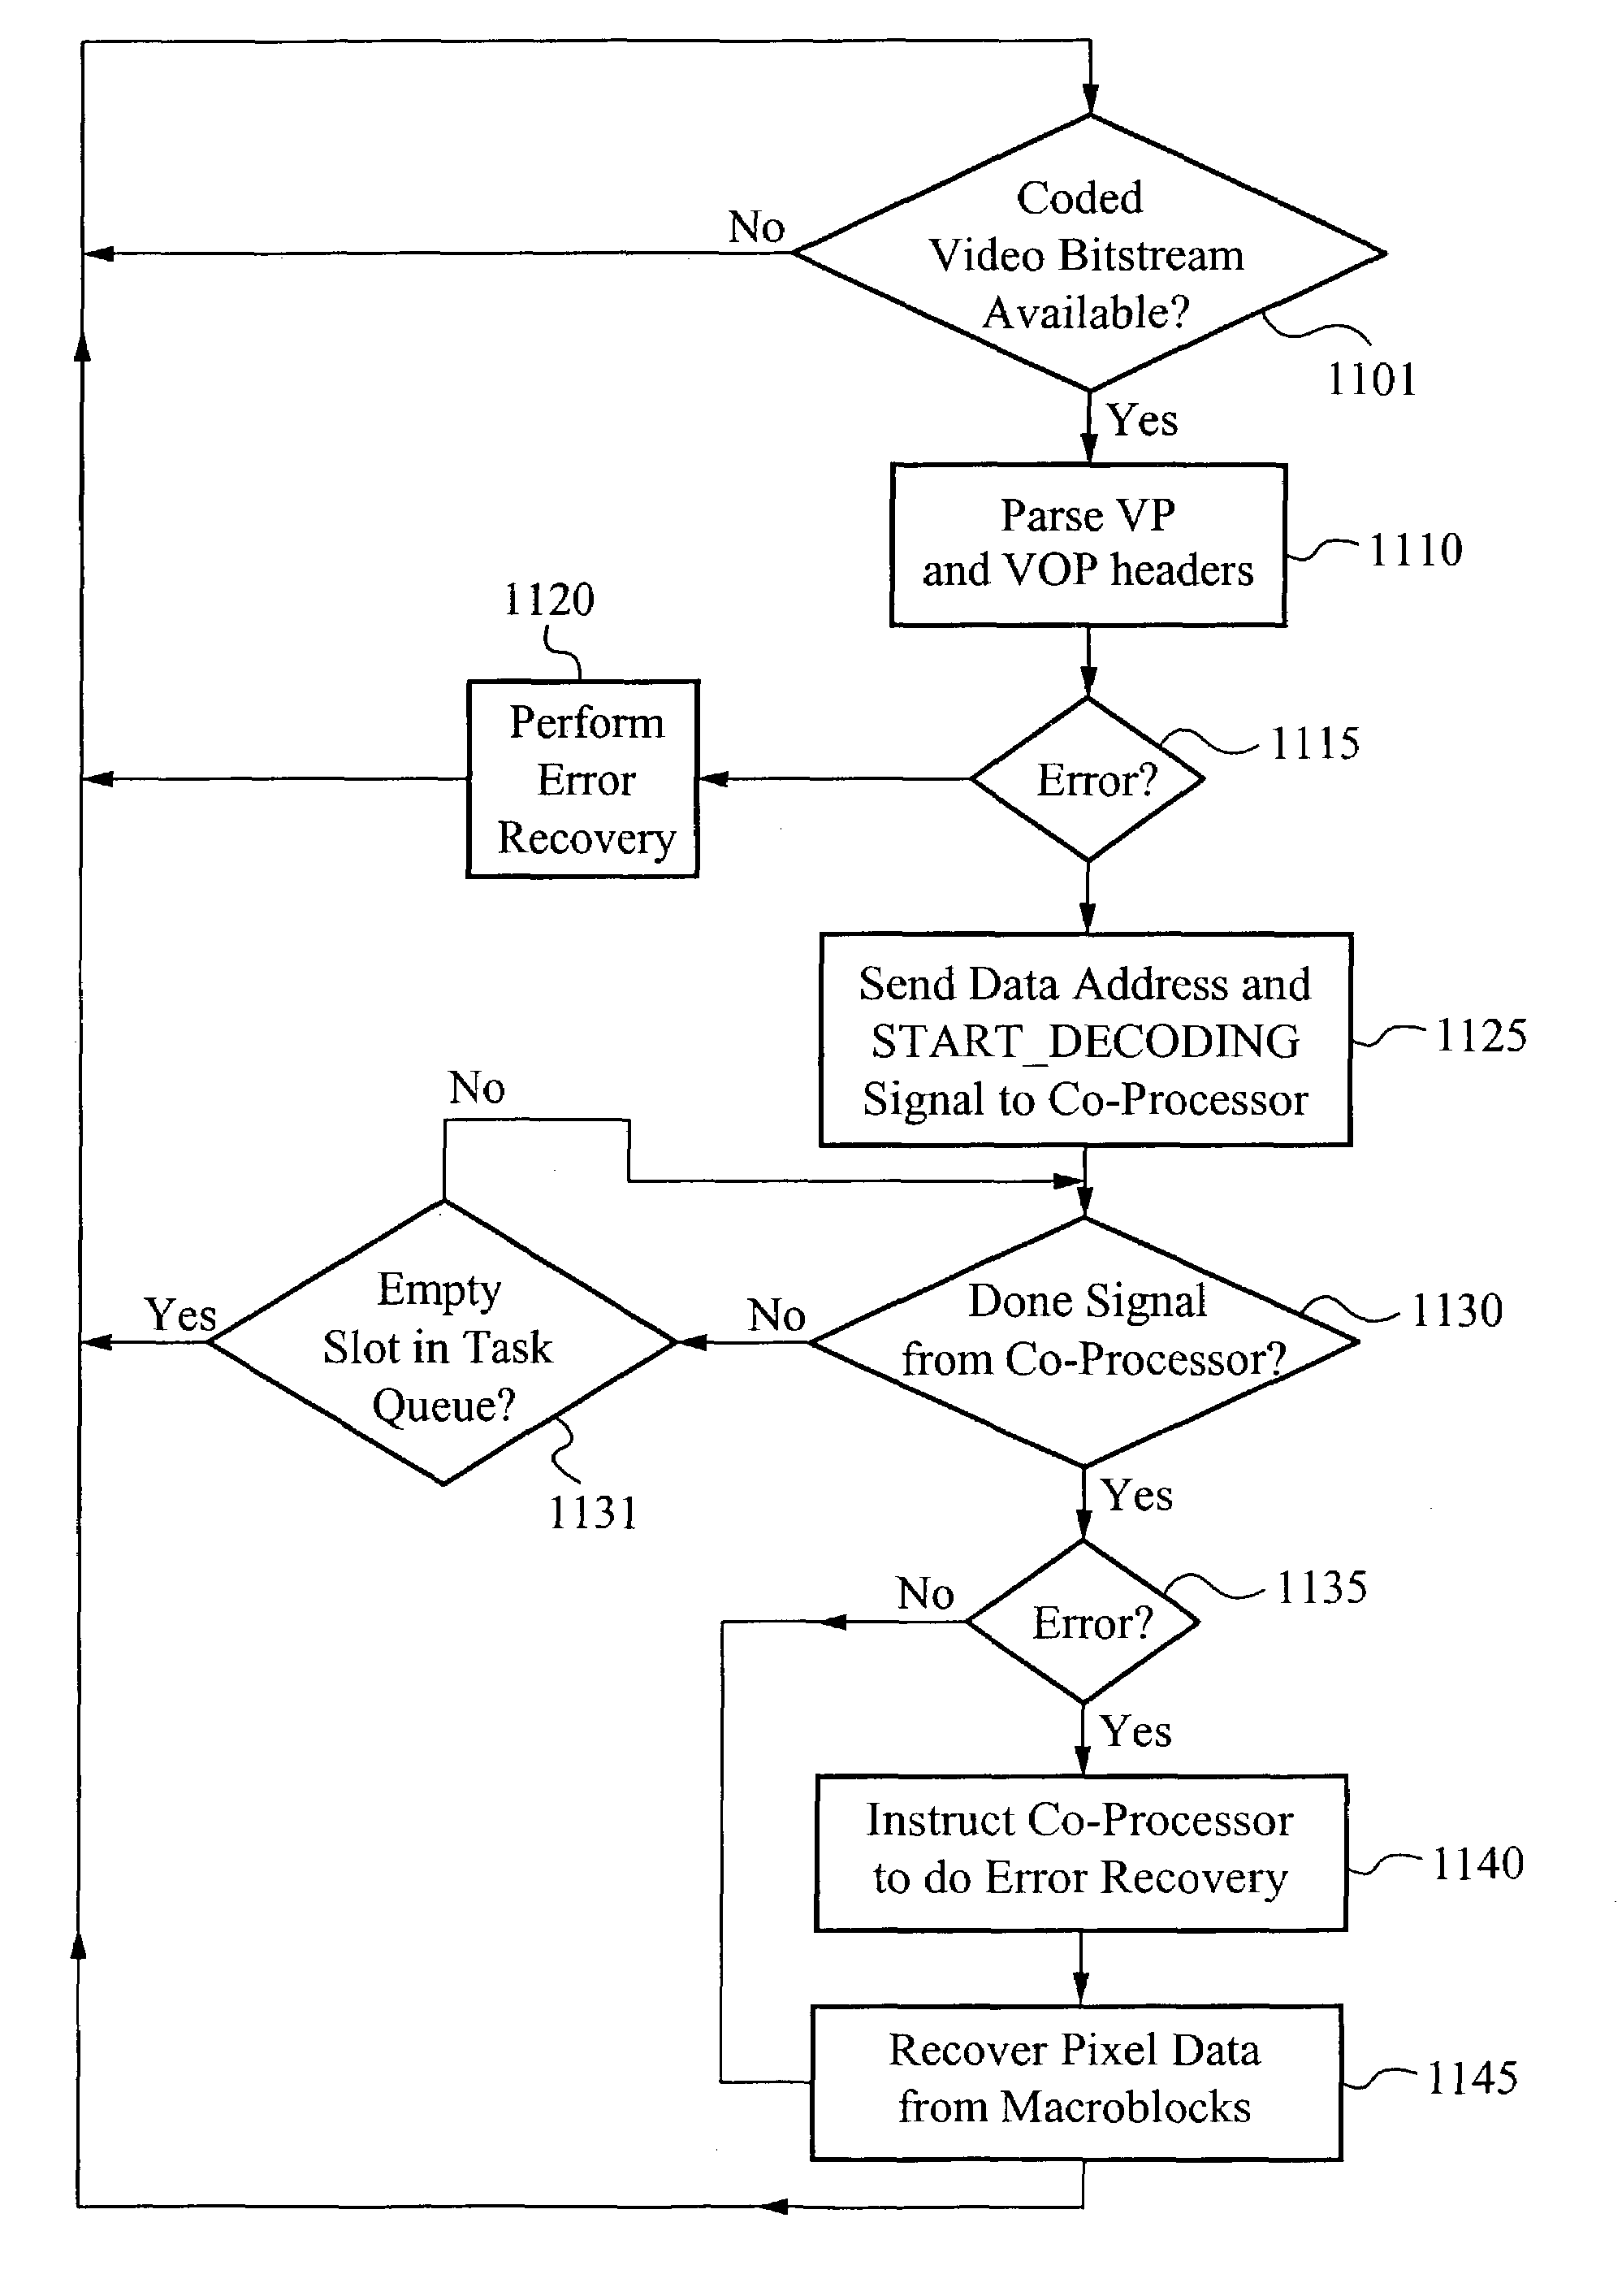 Apparatus and method of parallel processing an MPEG-4 data stream